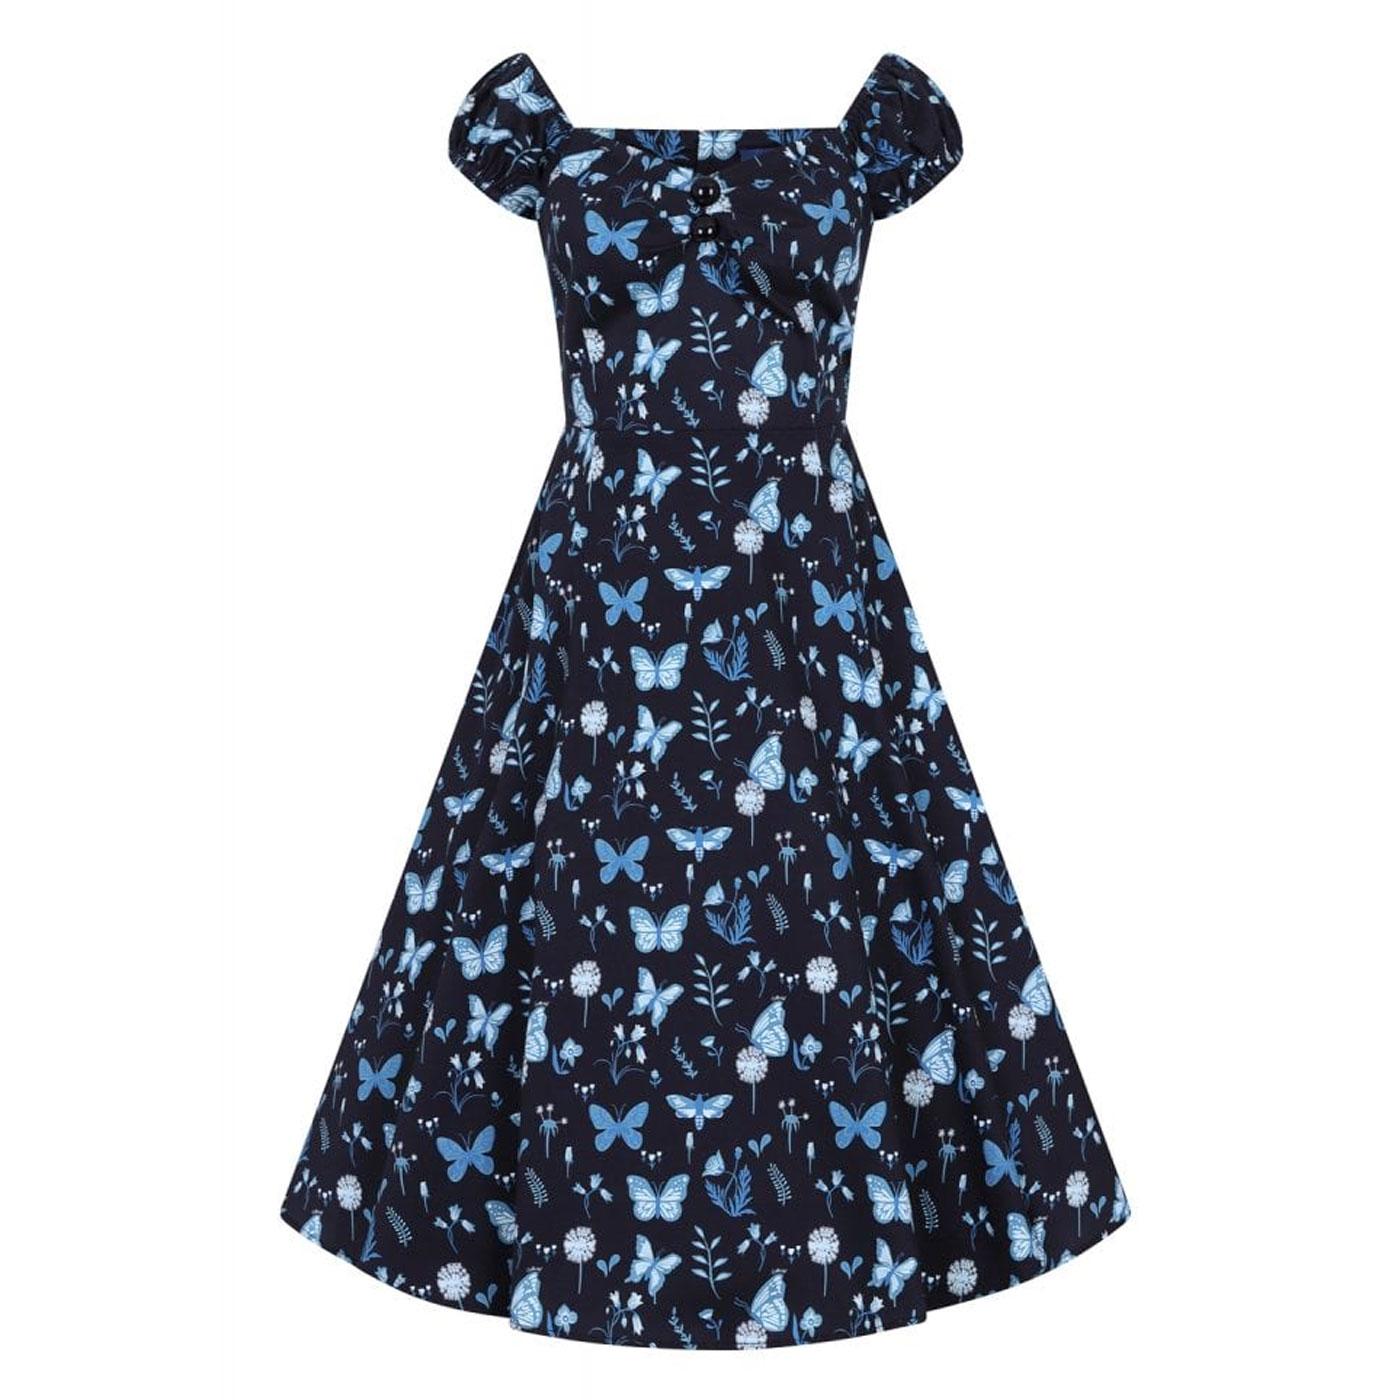 Dolores COLLECTIF Midnight Butterfly Doll Dress